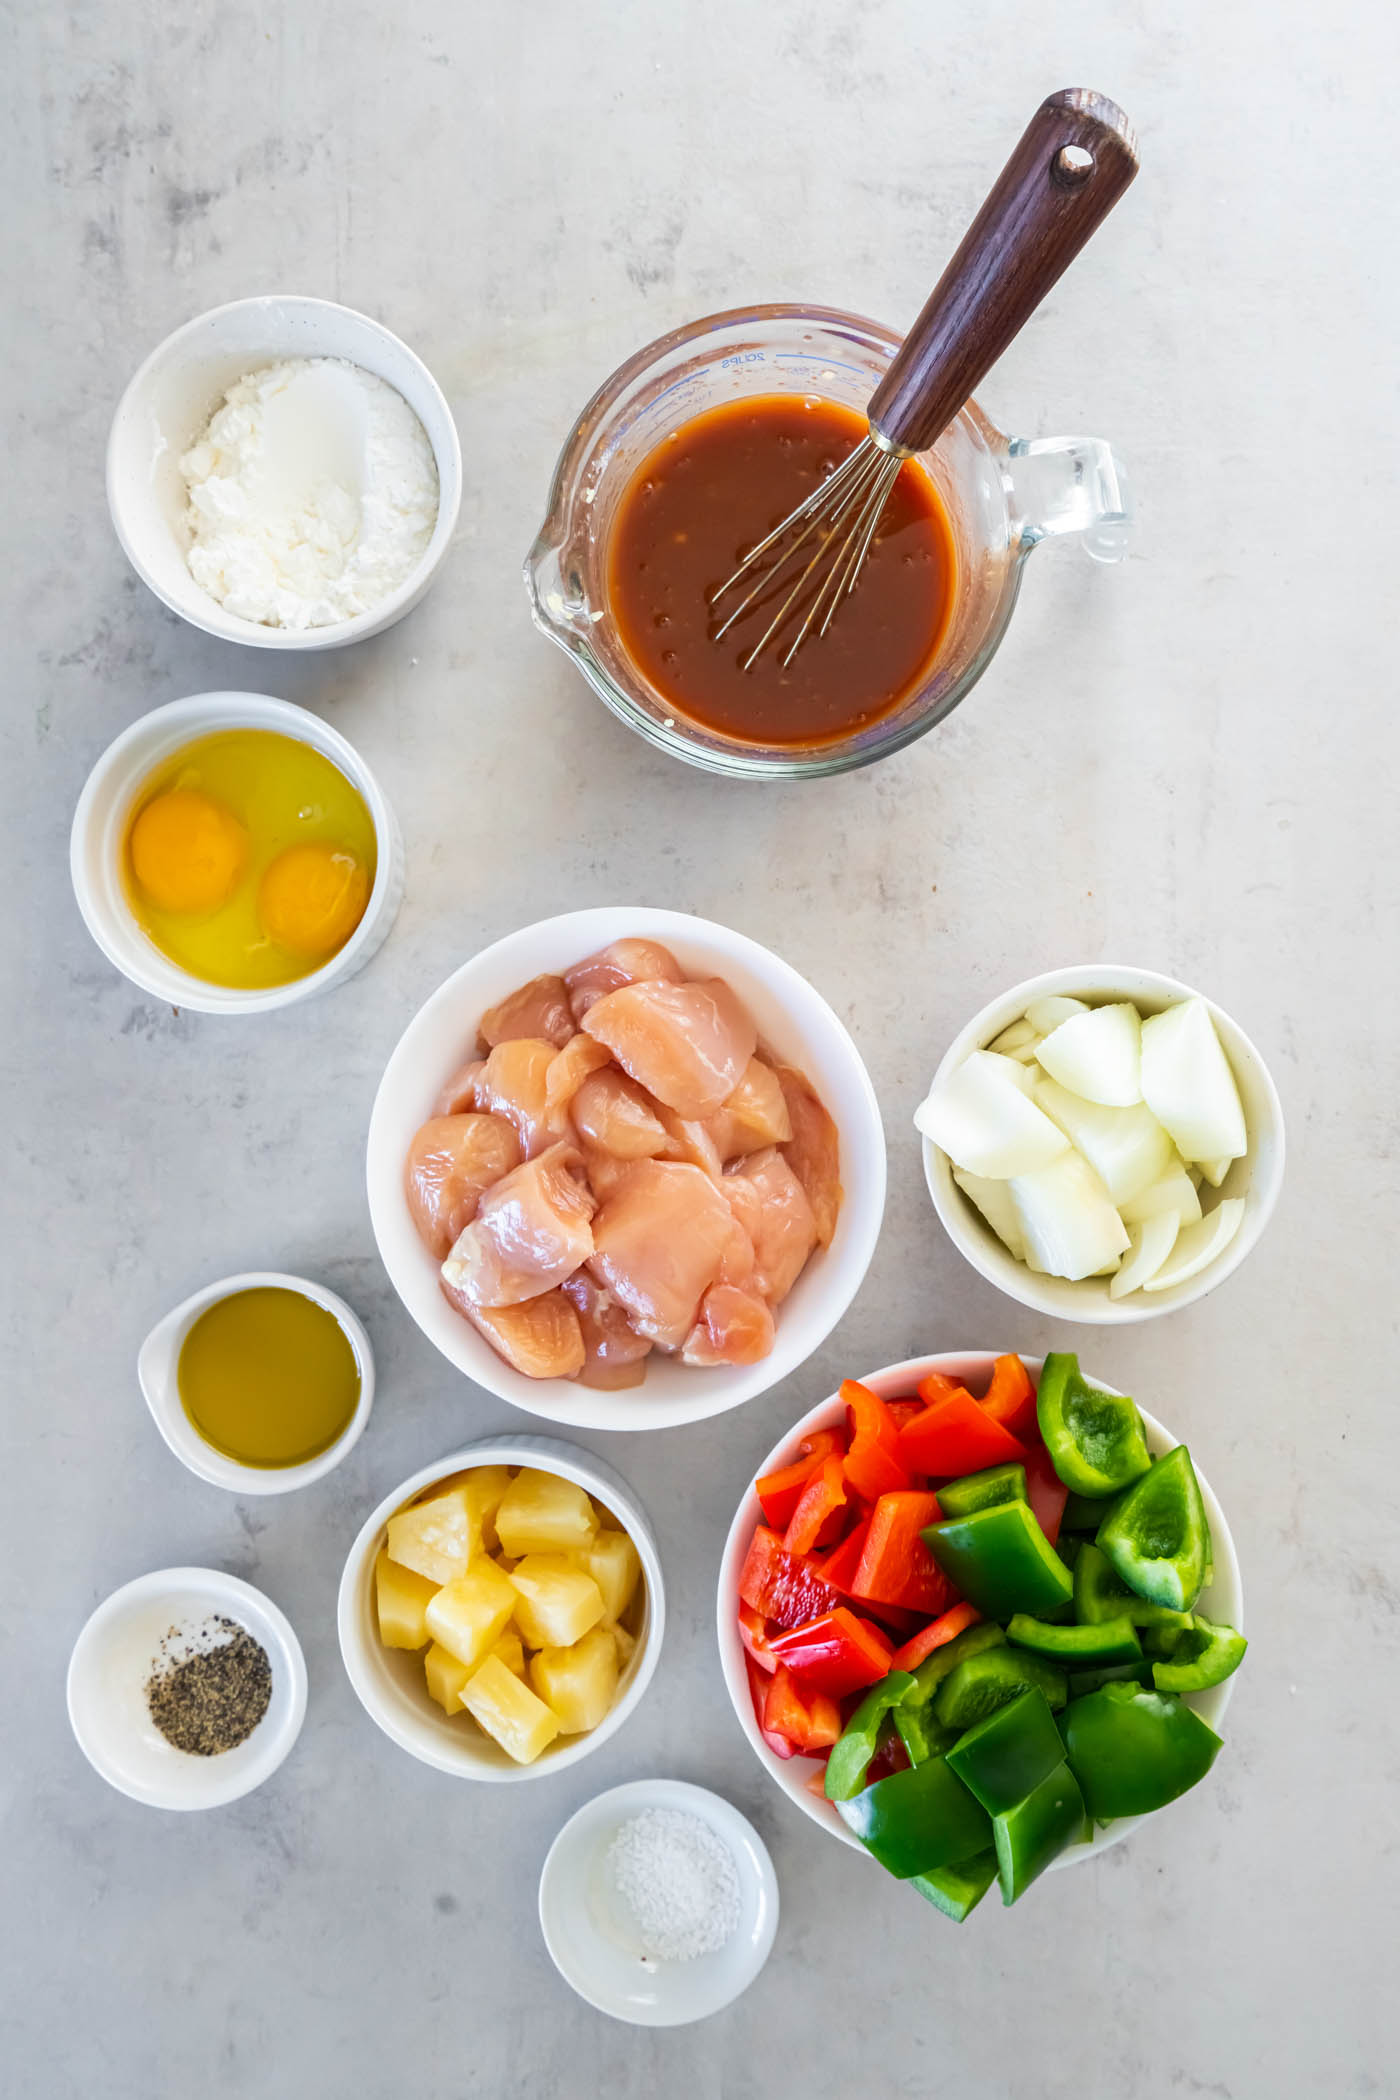 Sweet and sour chicken ingredients with sauce whisked together.